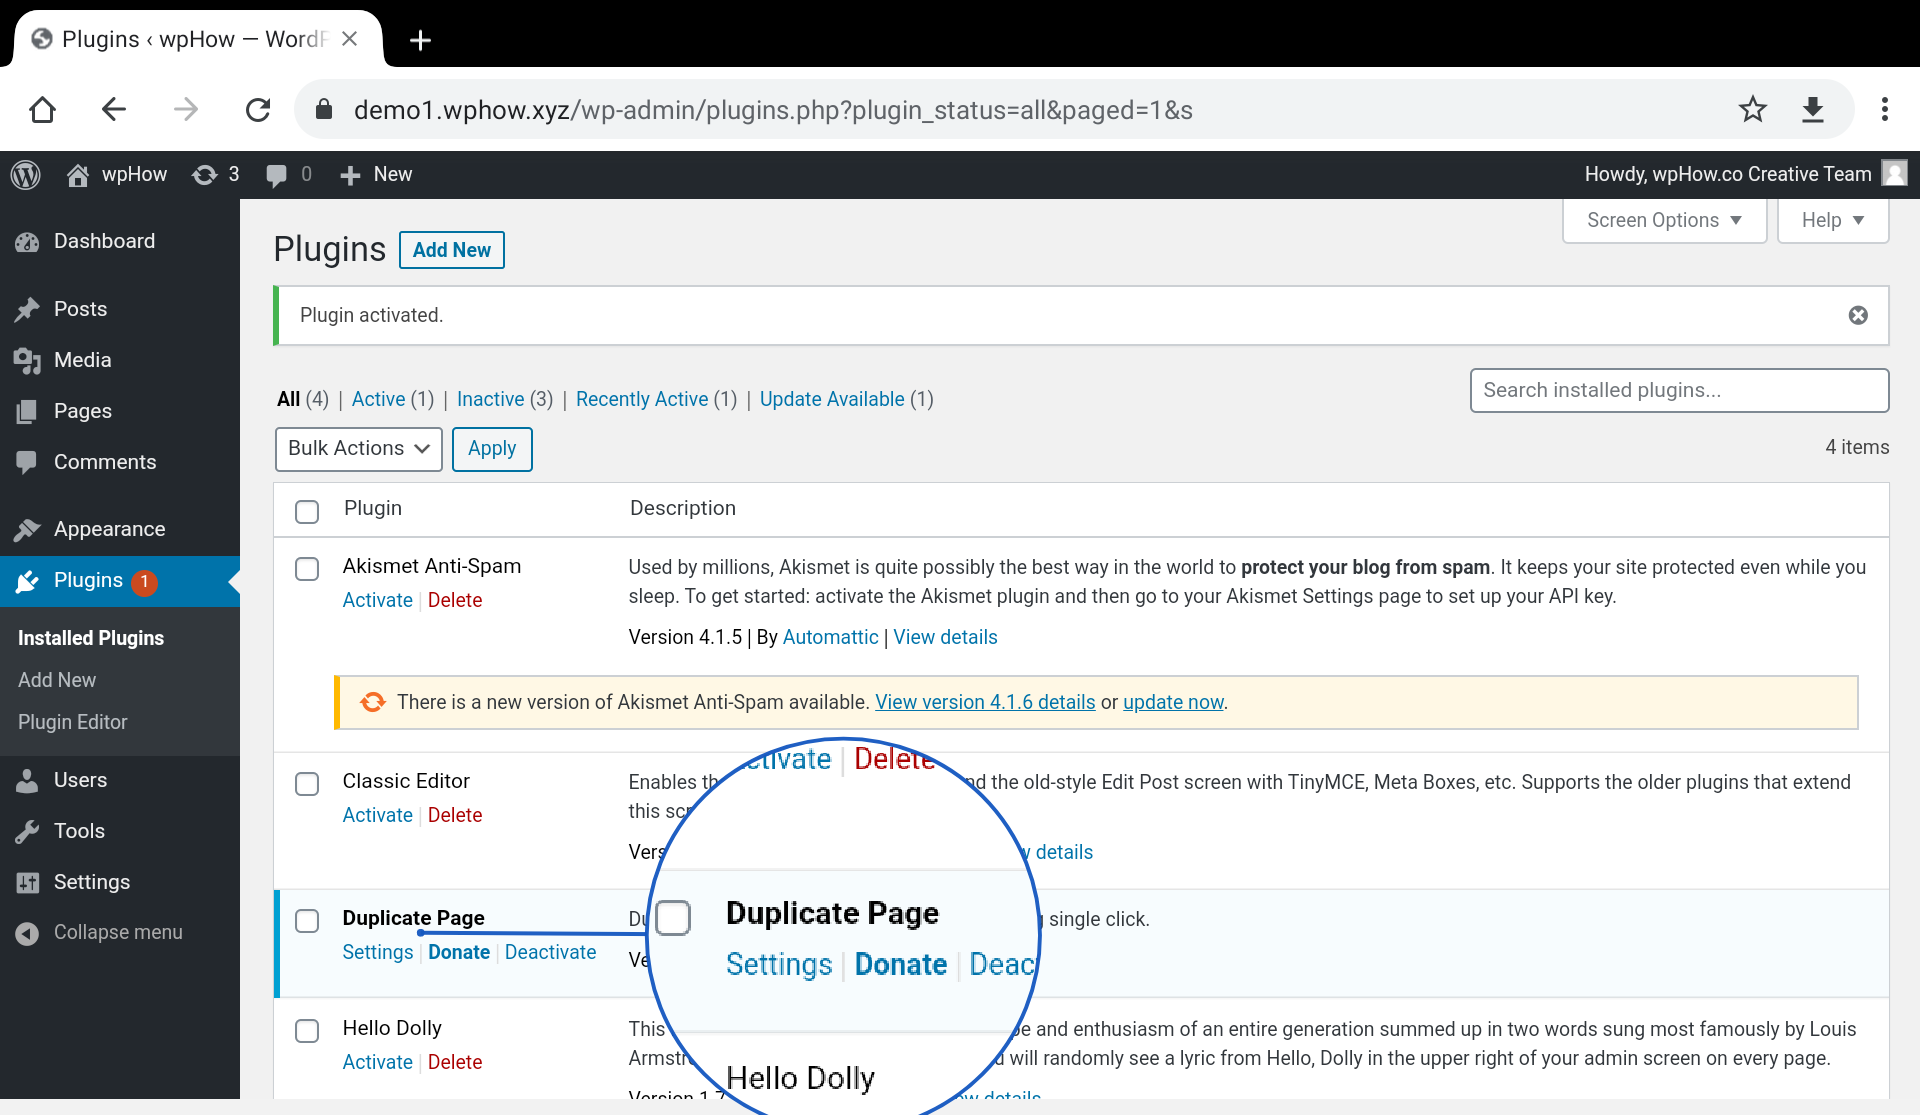 click-on-settings - duplicate page in wordpress